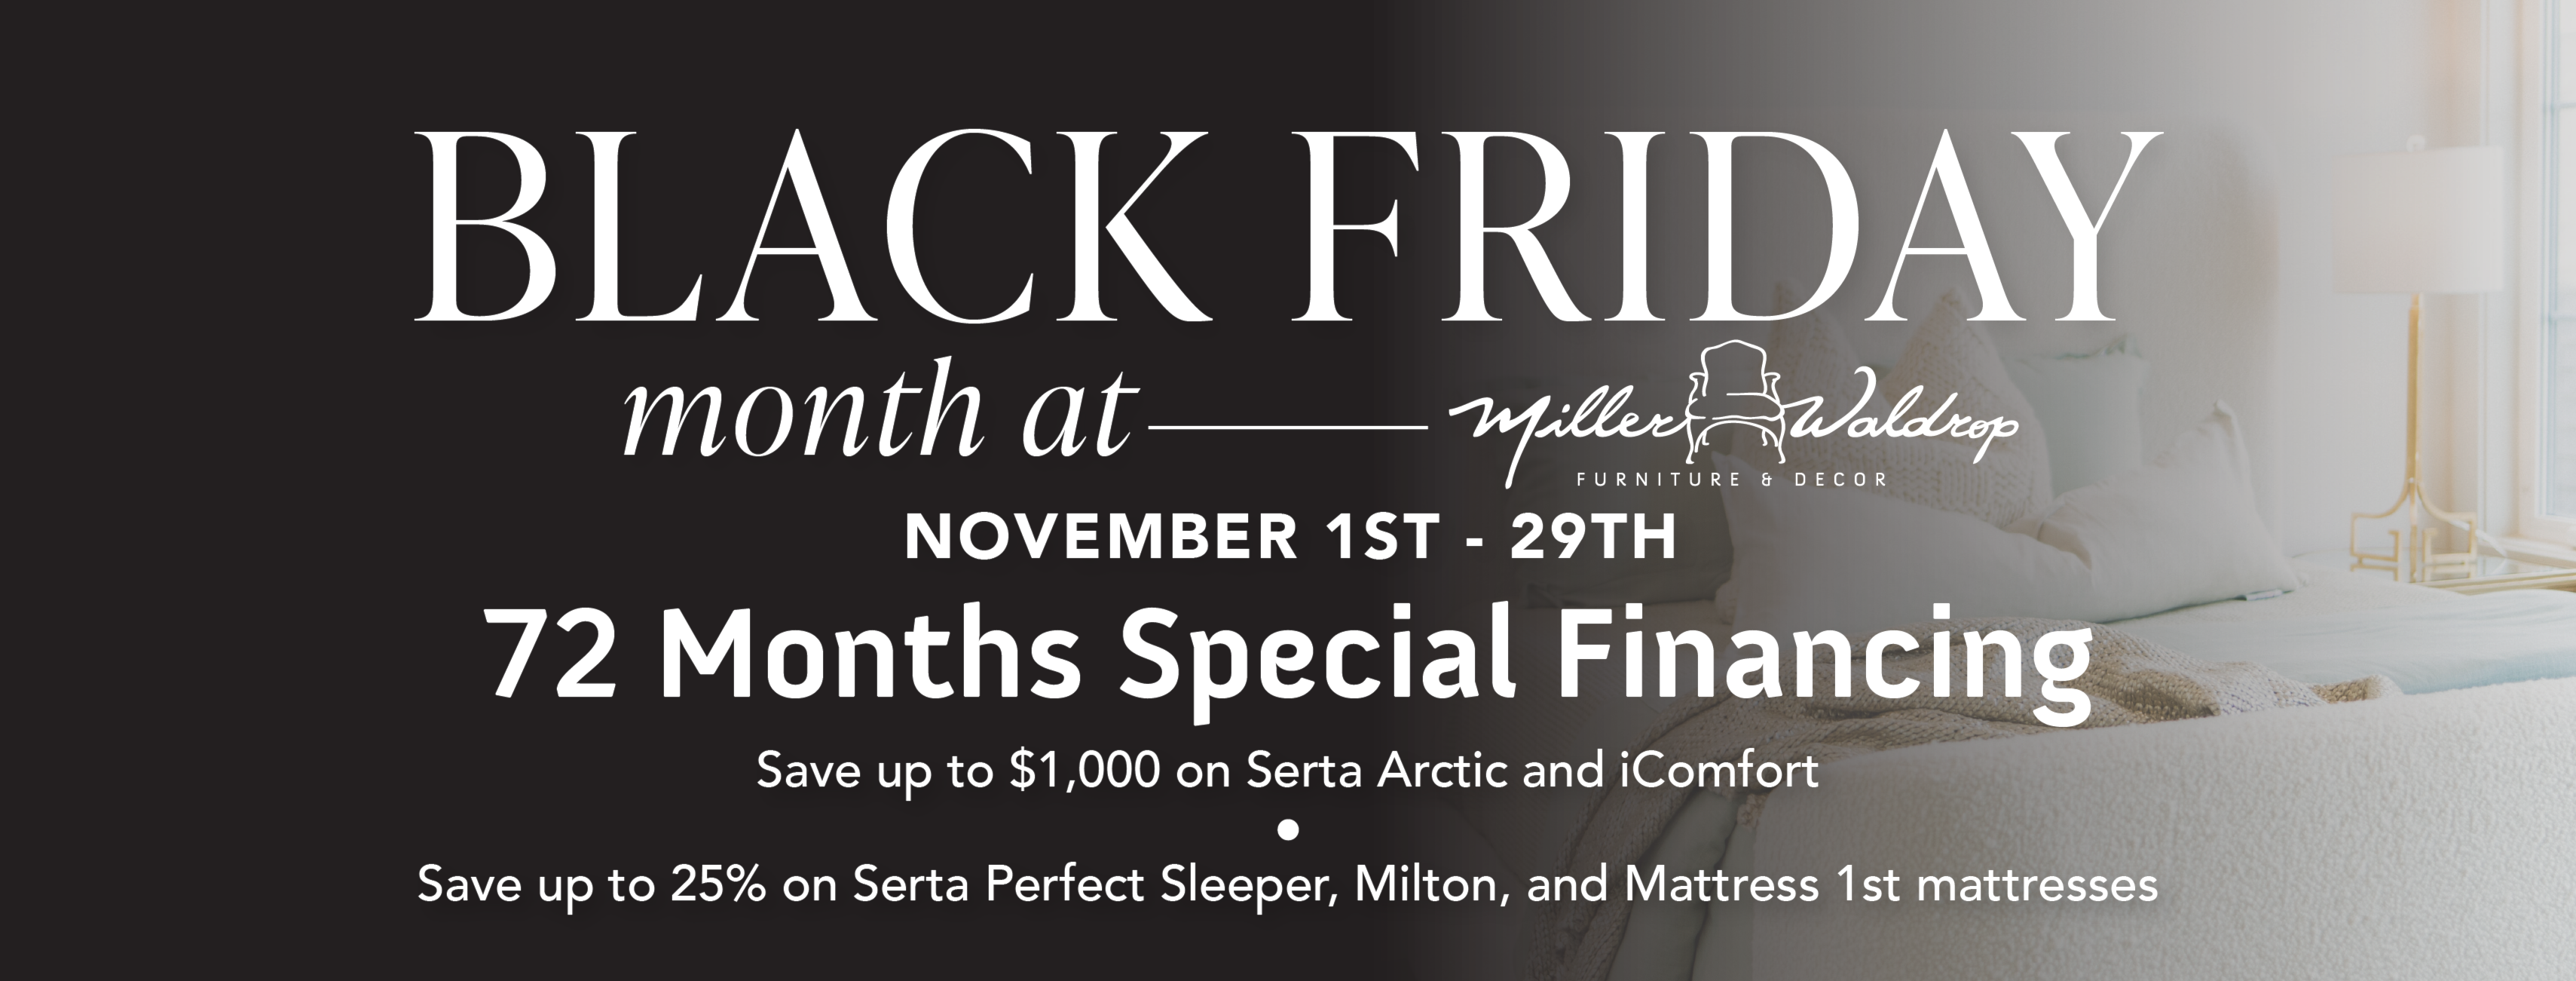 Black Friday Month at Miller Waldrop. November 1st through the 29th.